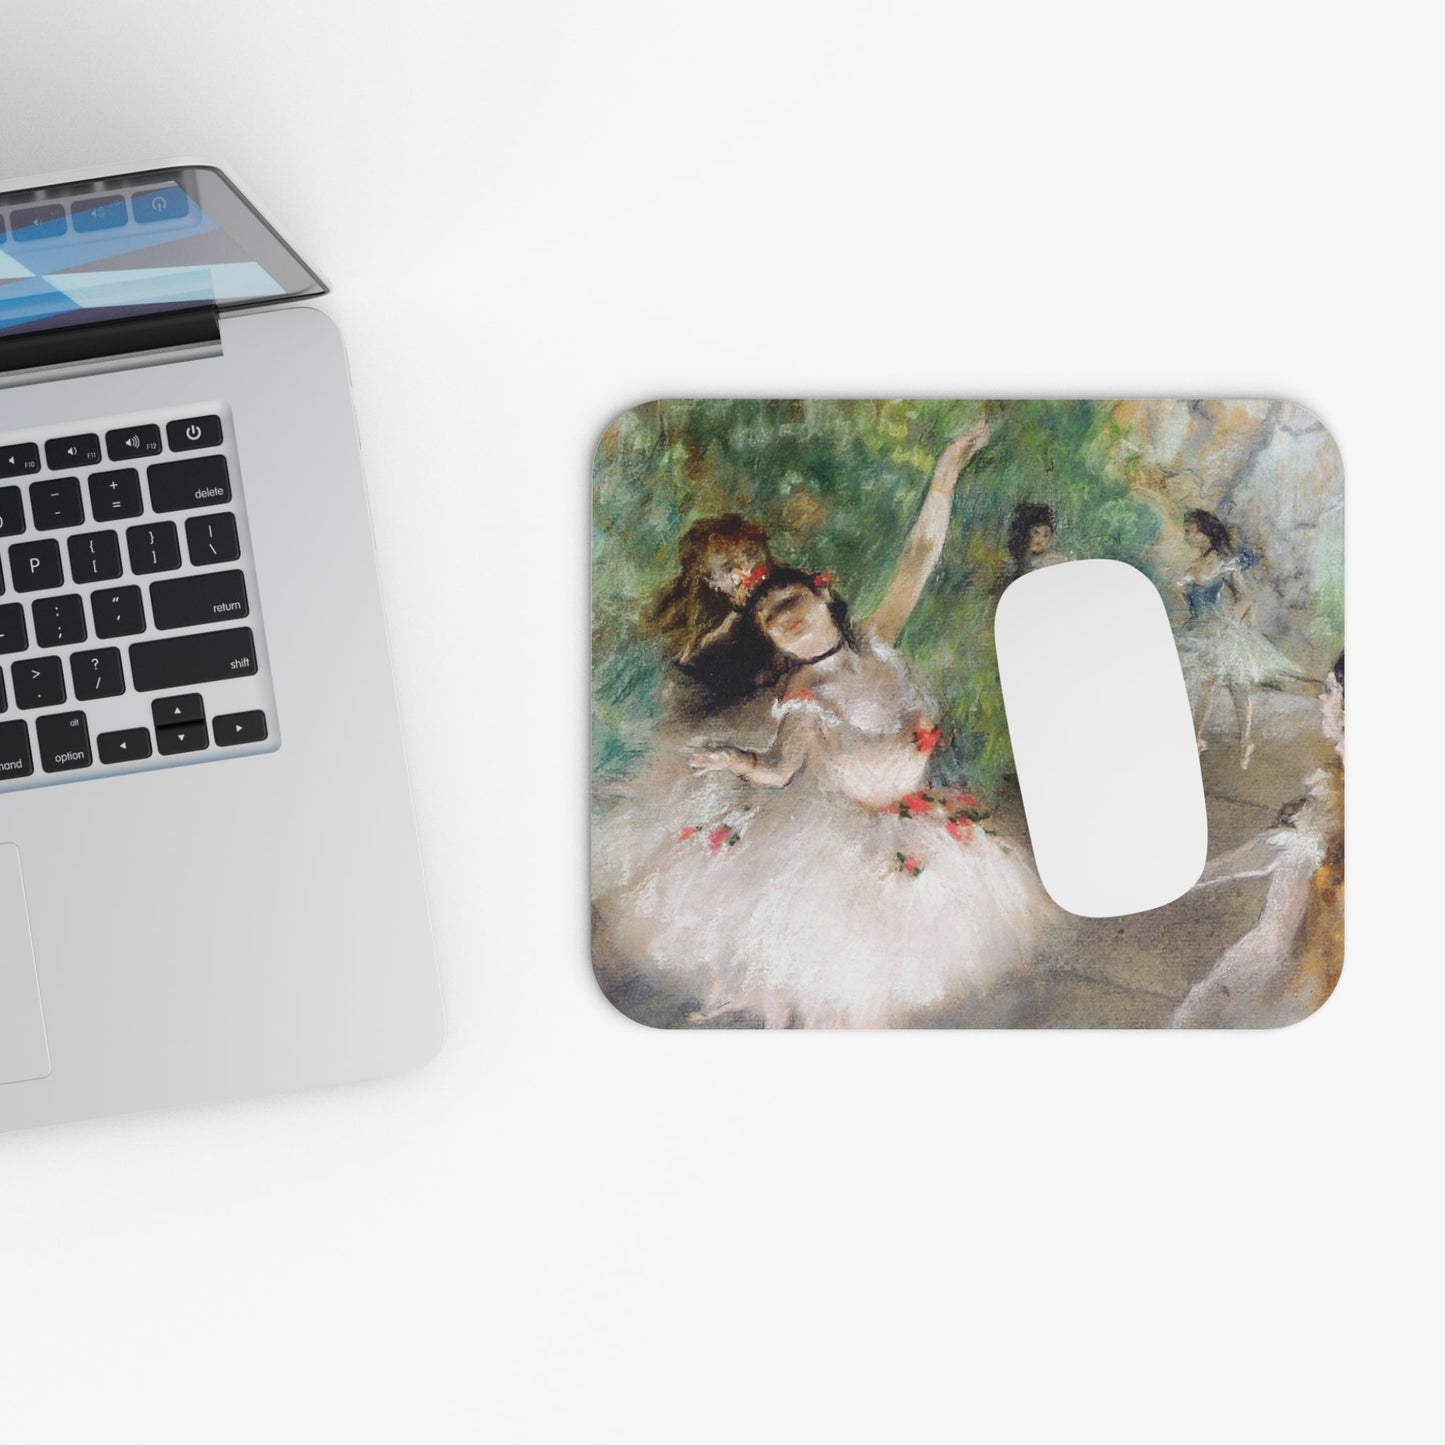 Vintage Ballerinas Design Laptop Mouse Pad with White Mouse